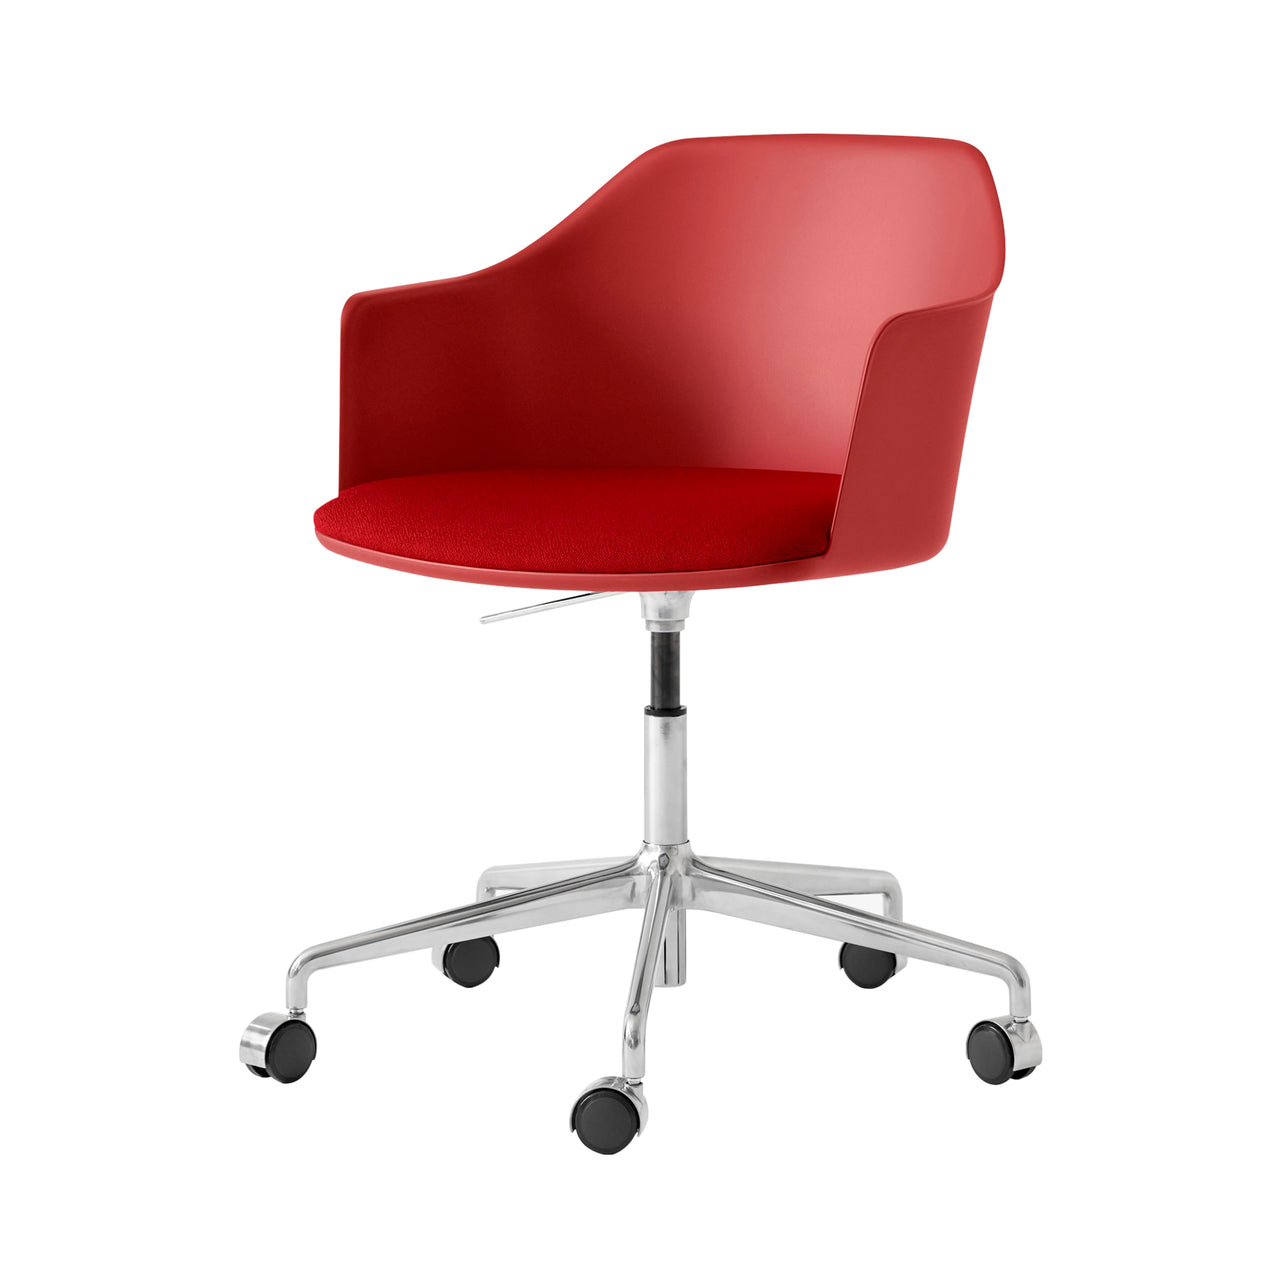 Rely Armchair HW54: Polished Aluminum + Vermilion Red